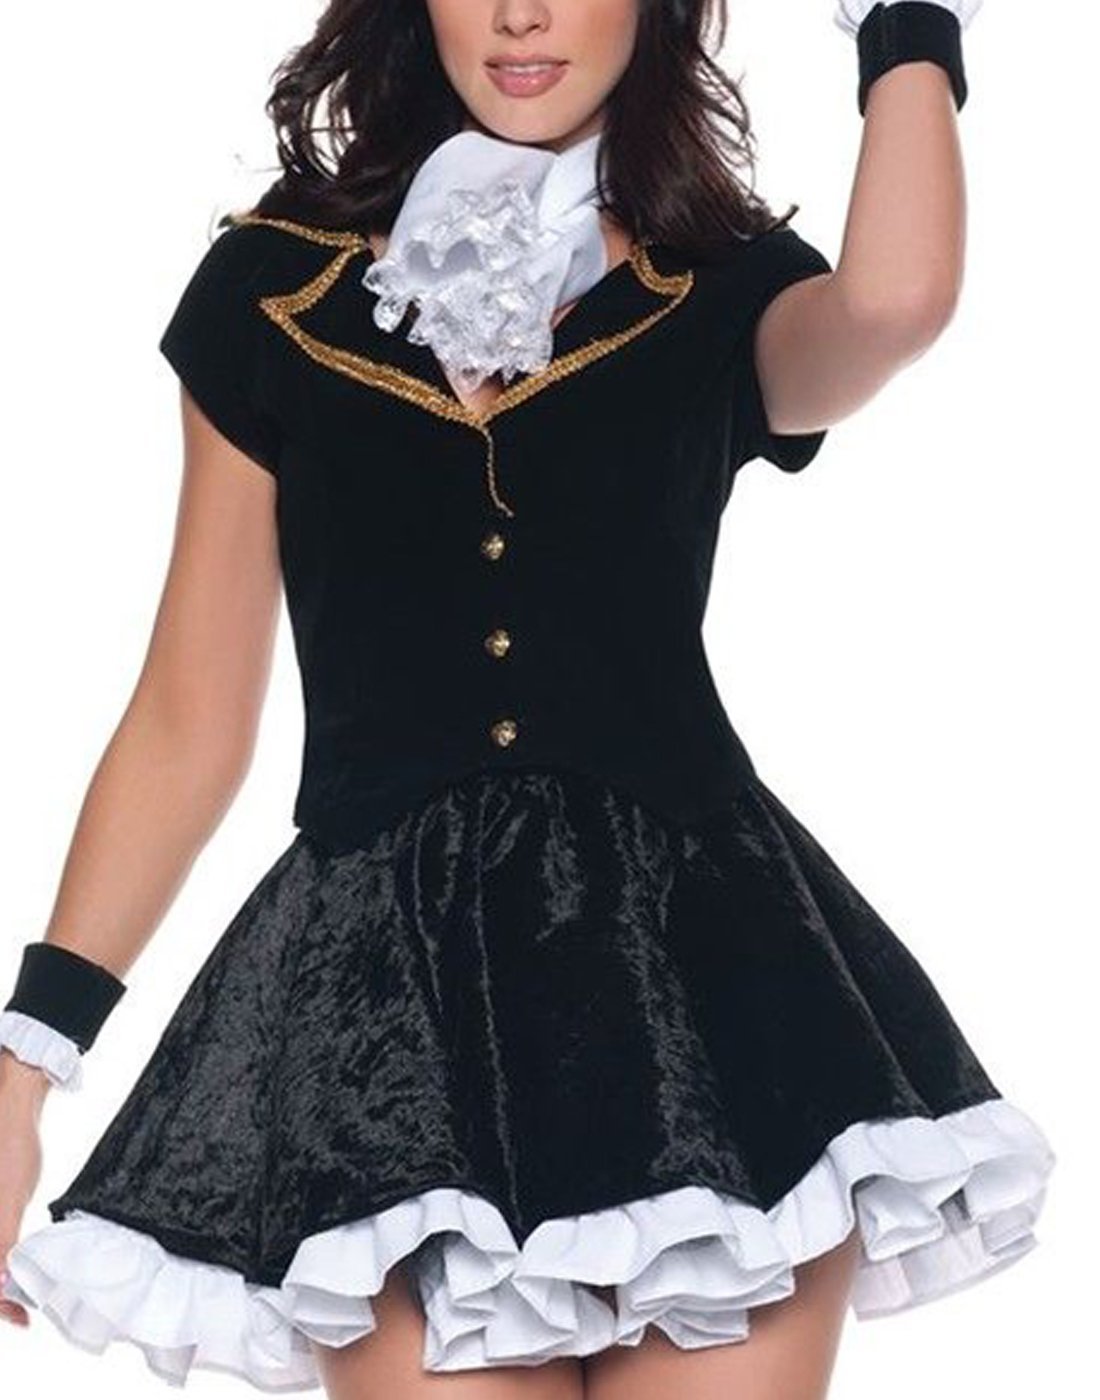 Women's Sexy Mad Hatter Costume - Totally Mad, Black/White, Medium